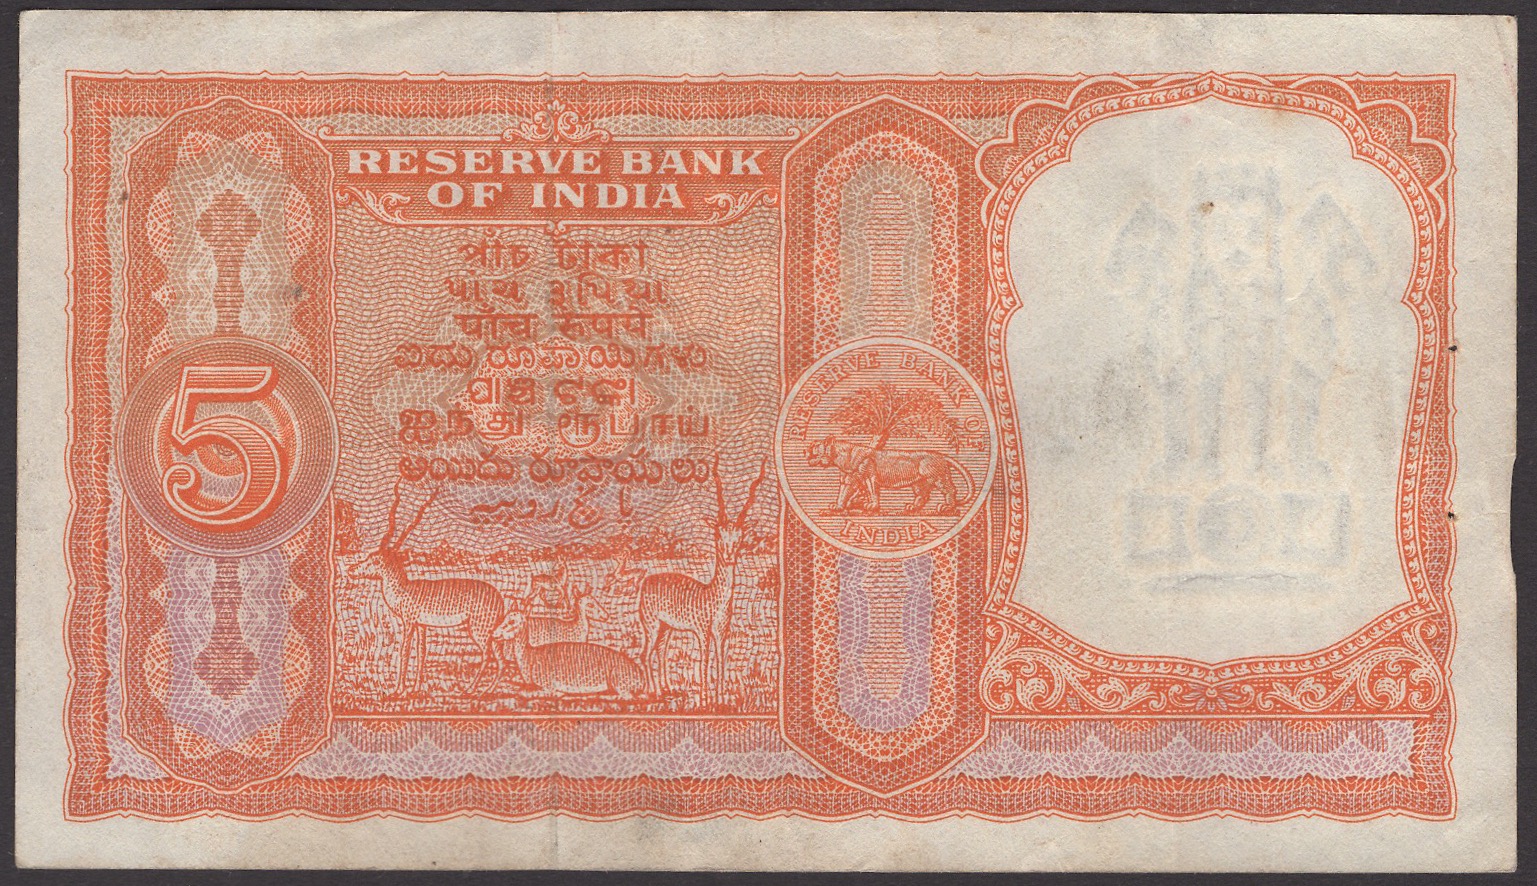 Reserve Bank of India, Persian Gulf Issue, 5 Rupees, ND (1957-62), serial number Z/3... - Bild 2 aus 2